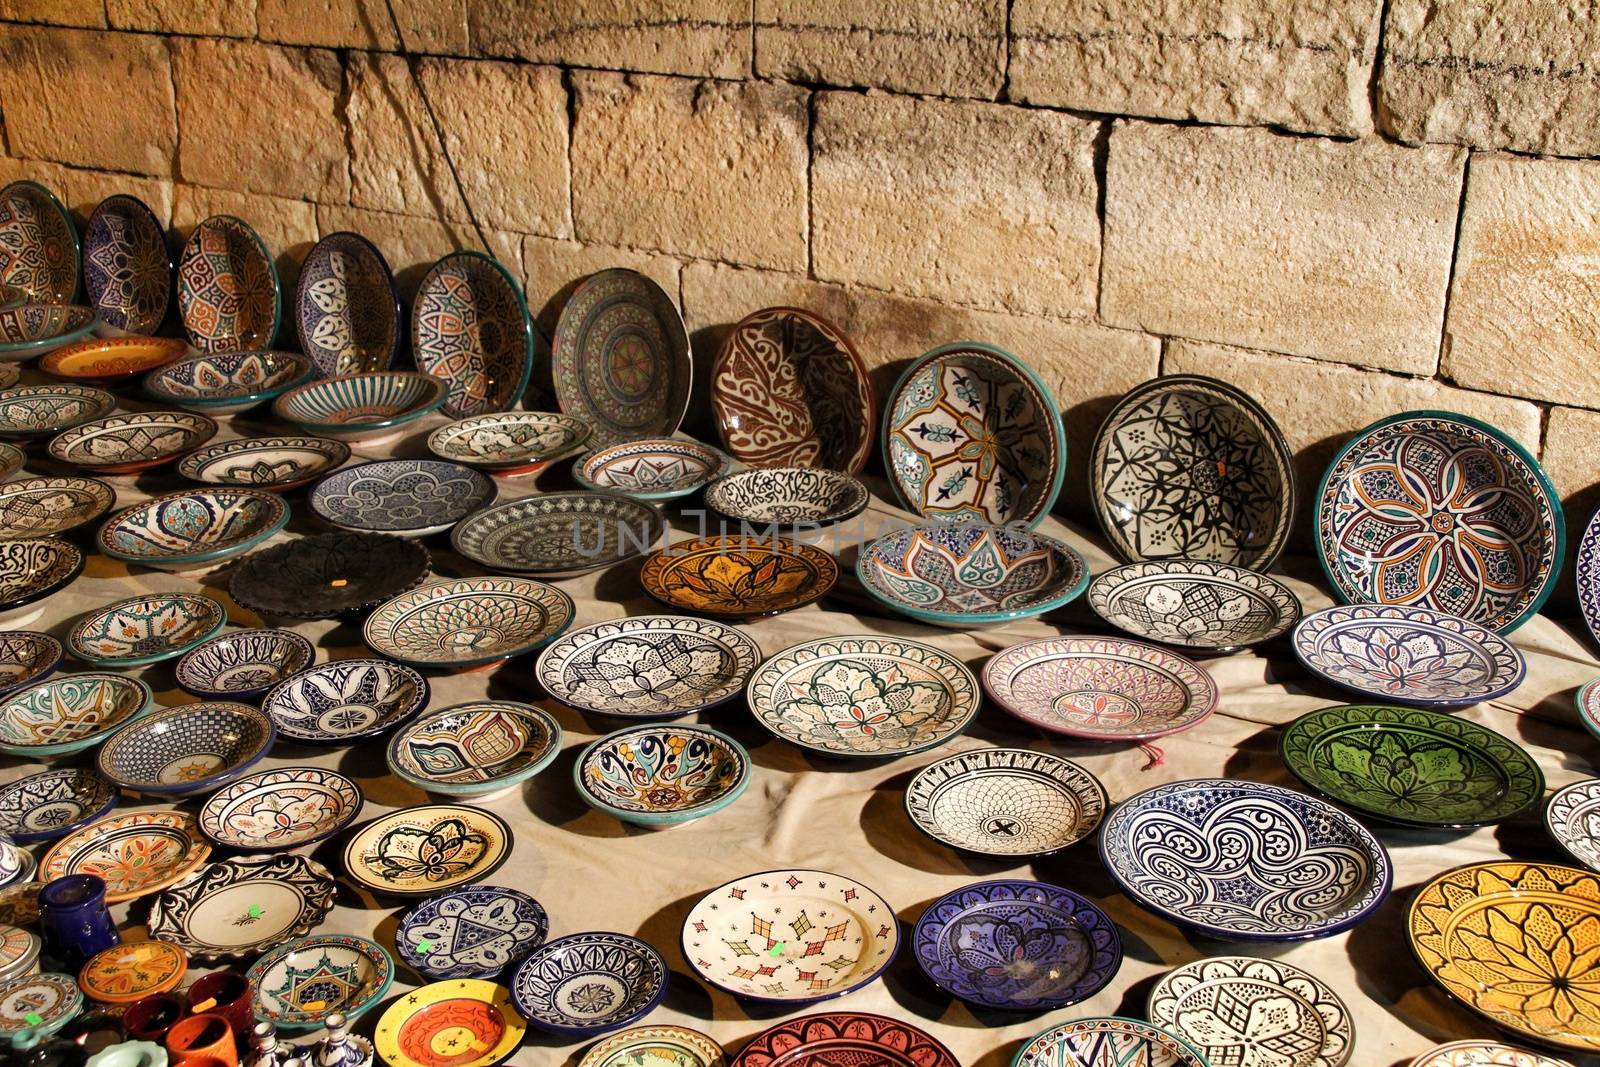 Ceramic plates for sale at a market stall by soniabonet